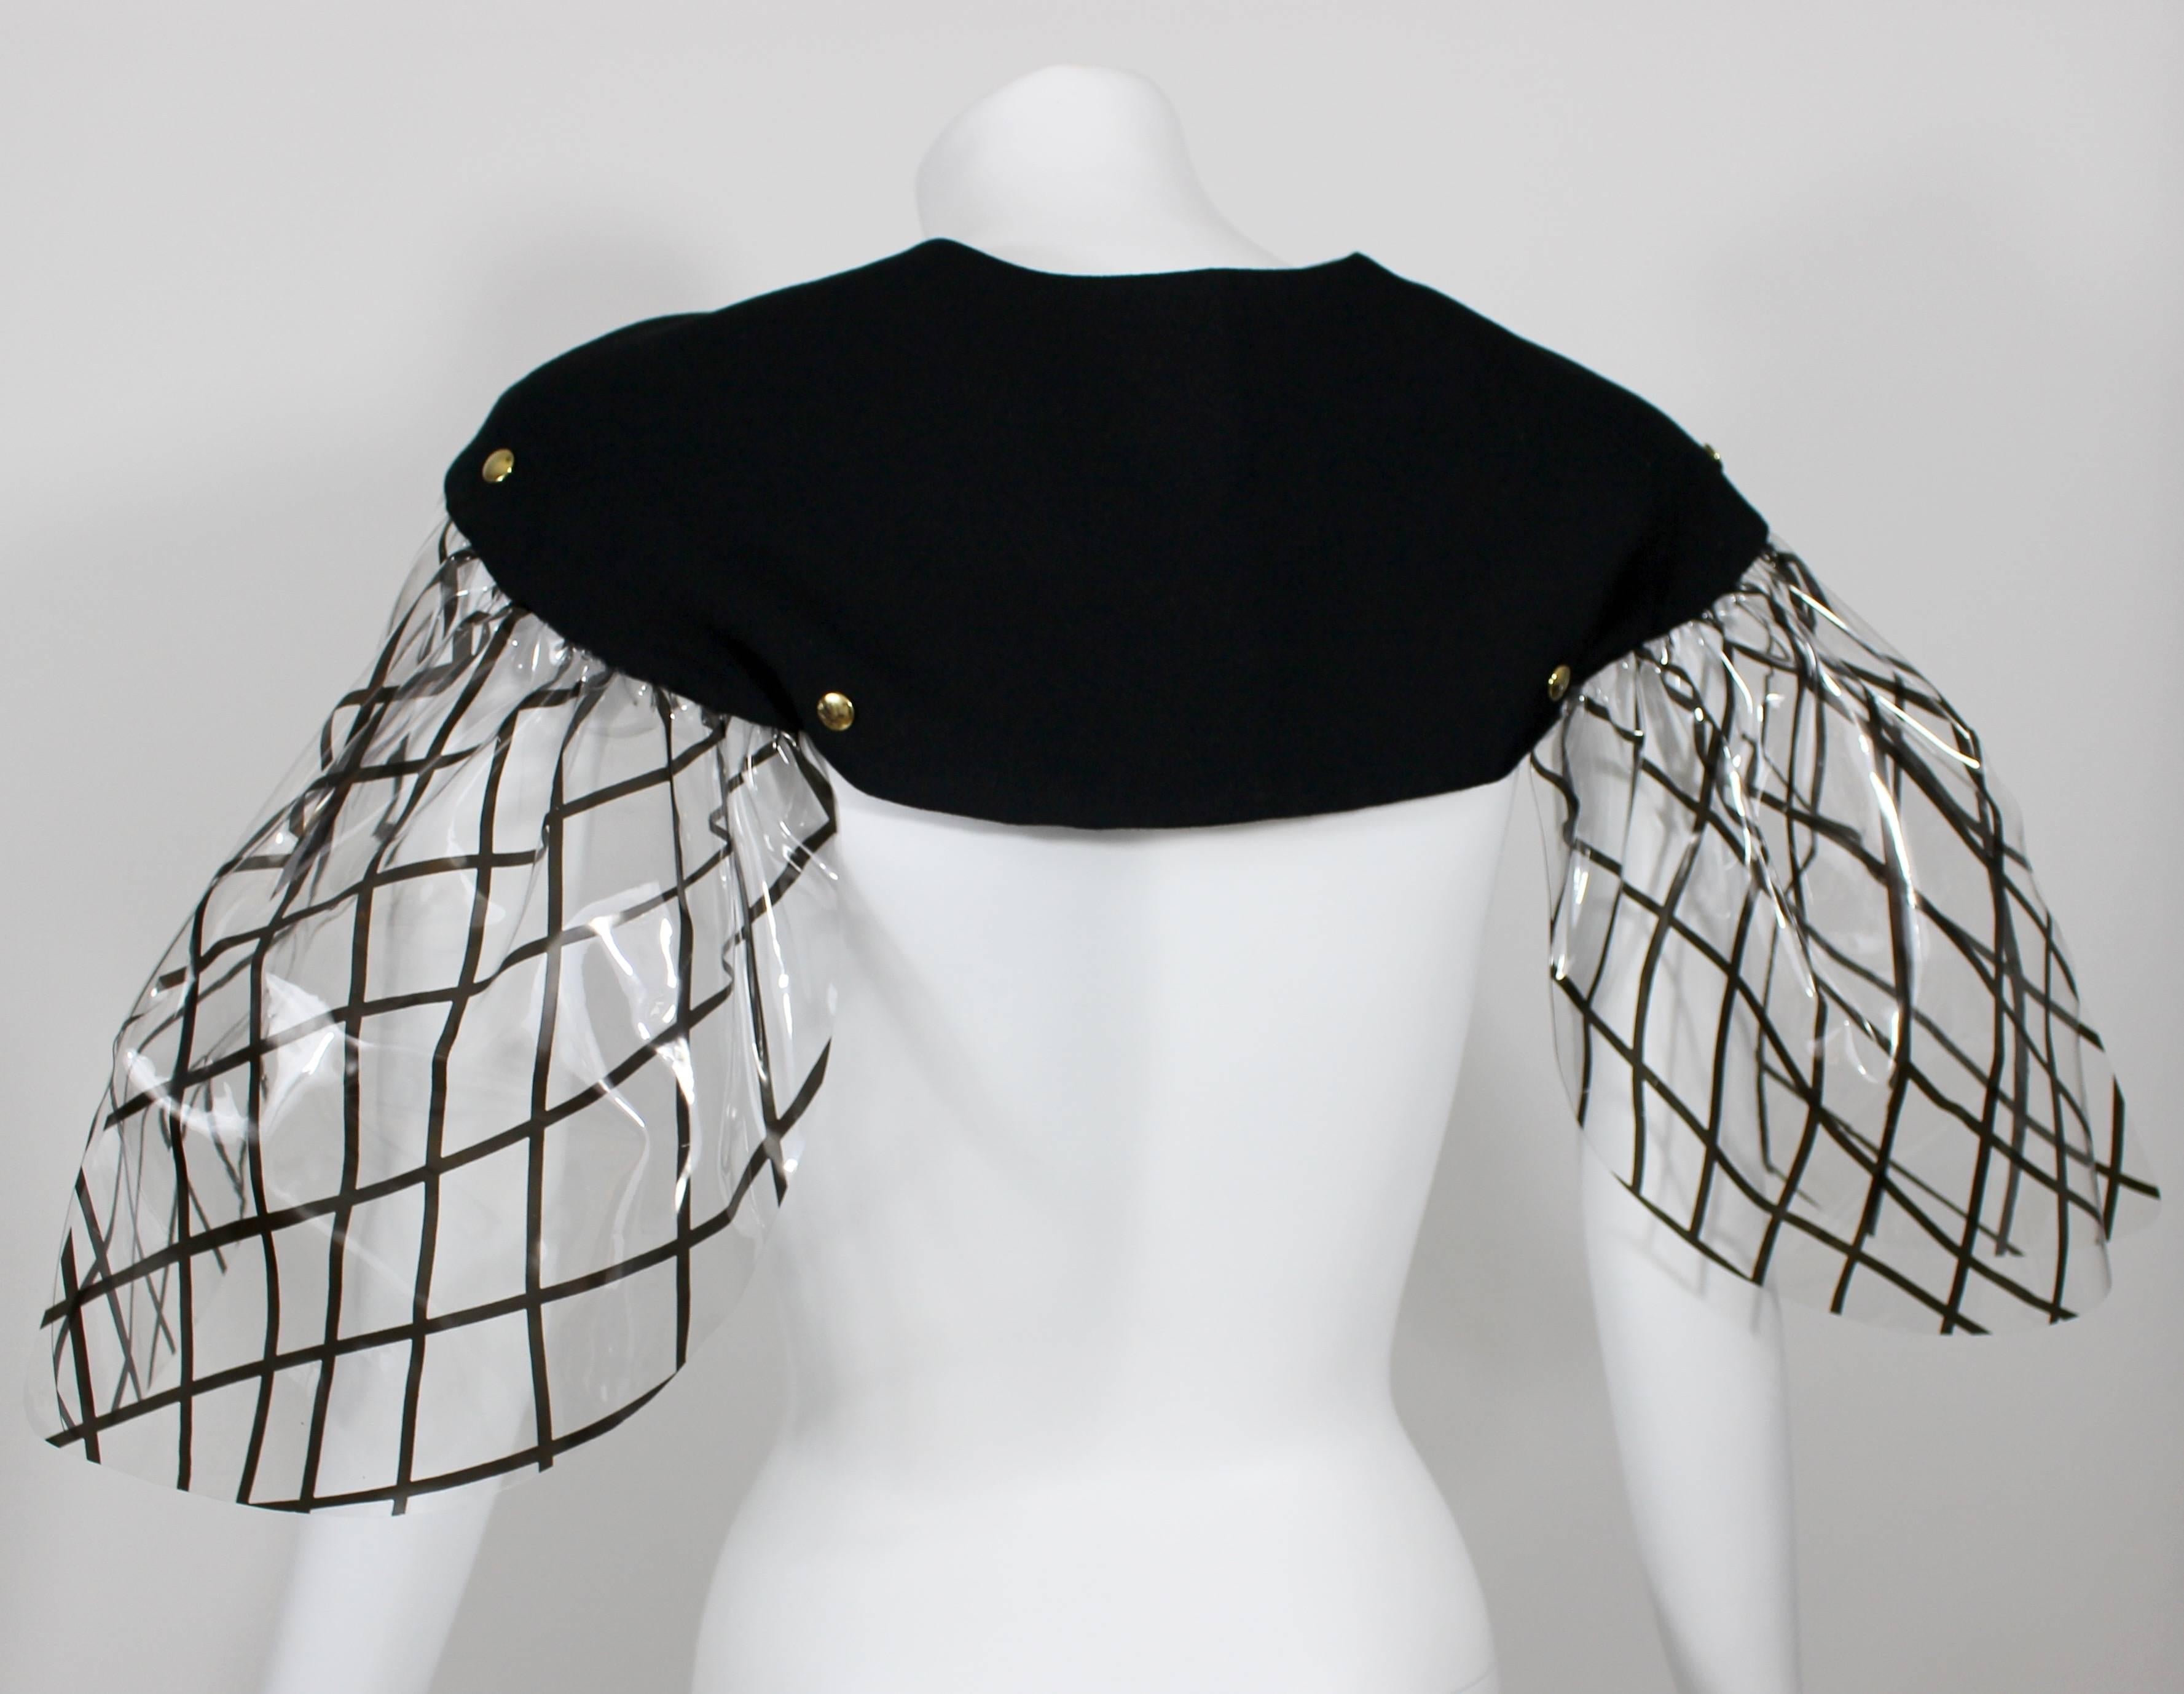 A black and clear  pvc Yves Saint Laurent capelet.
Fall 2010 collection
Gold metal snaps on the front.

Size estimate: S/M
Size 40
New with tags.
